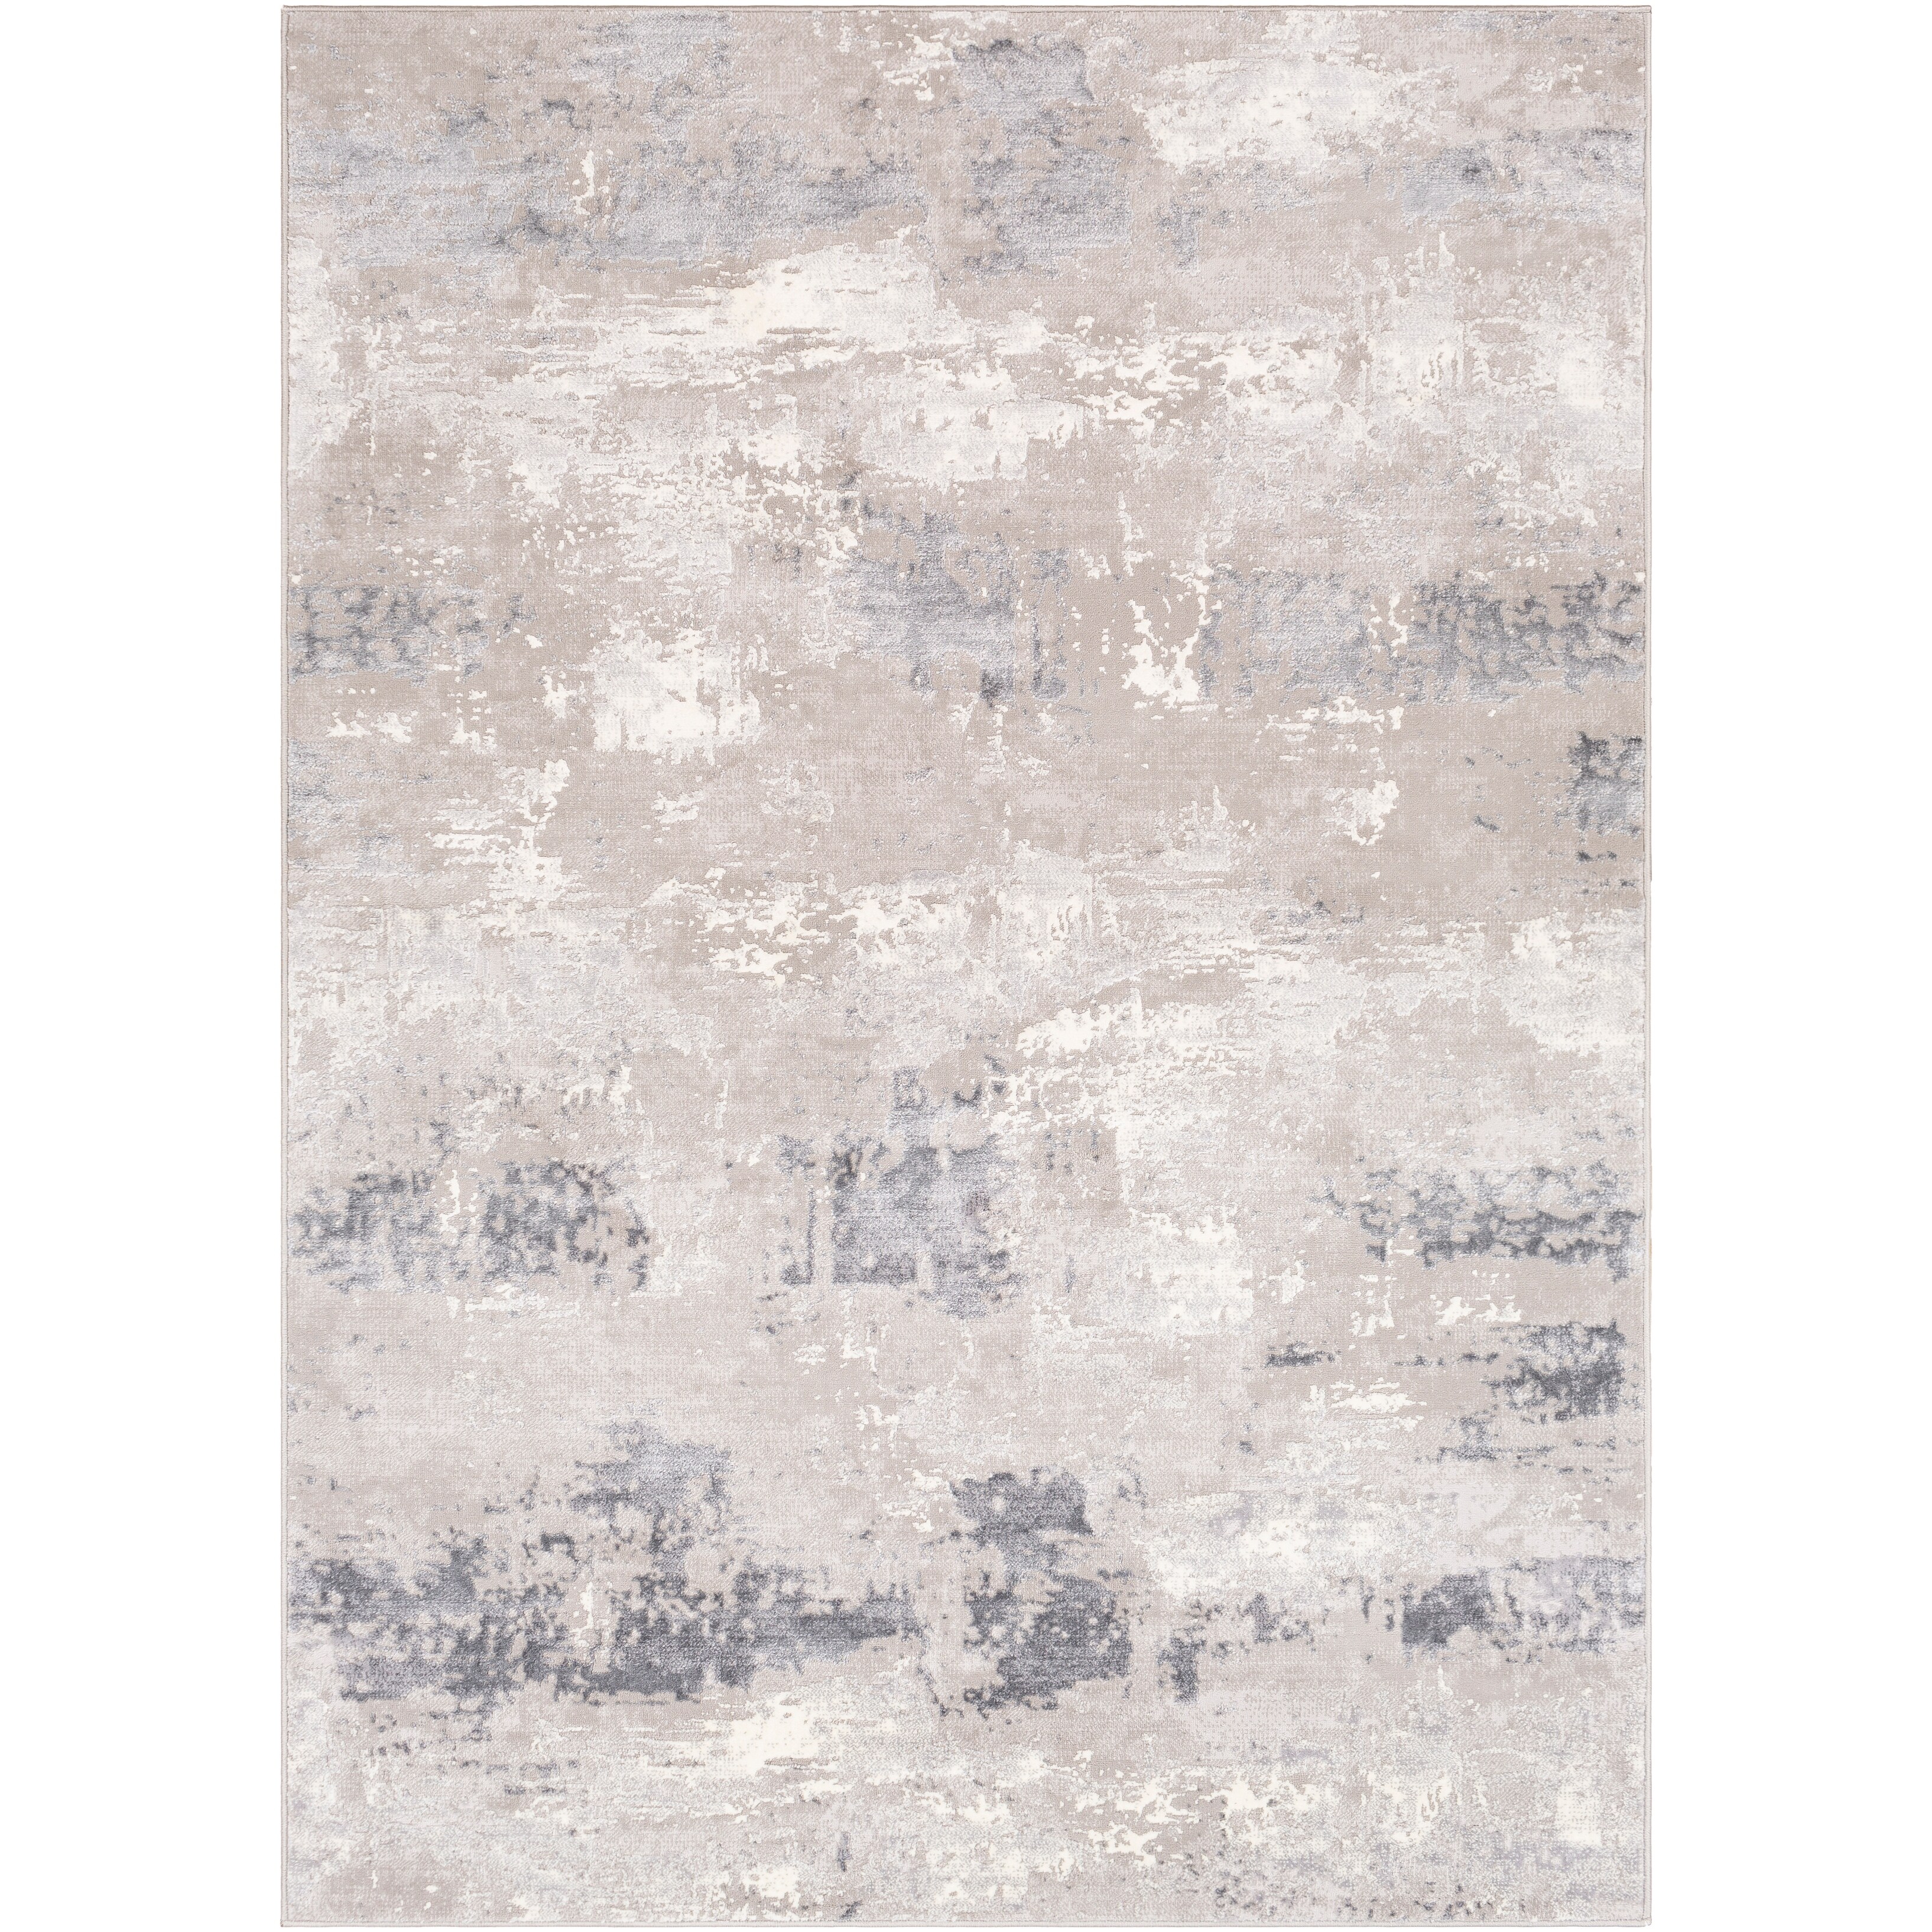 https://ak1.ostkcdn.com/images/products/is/images/direct/df11b11de57cee78682b72cb059ddd73f1eae5d4/Cinza-Abstract-Industrial-Area-Rug.jpg